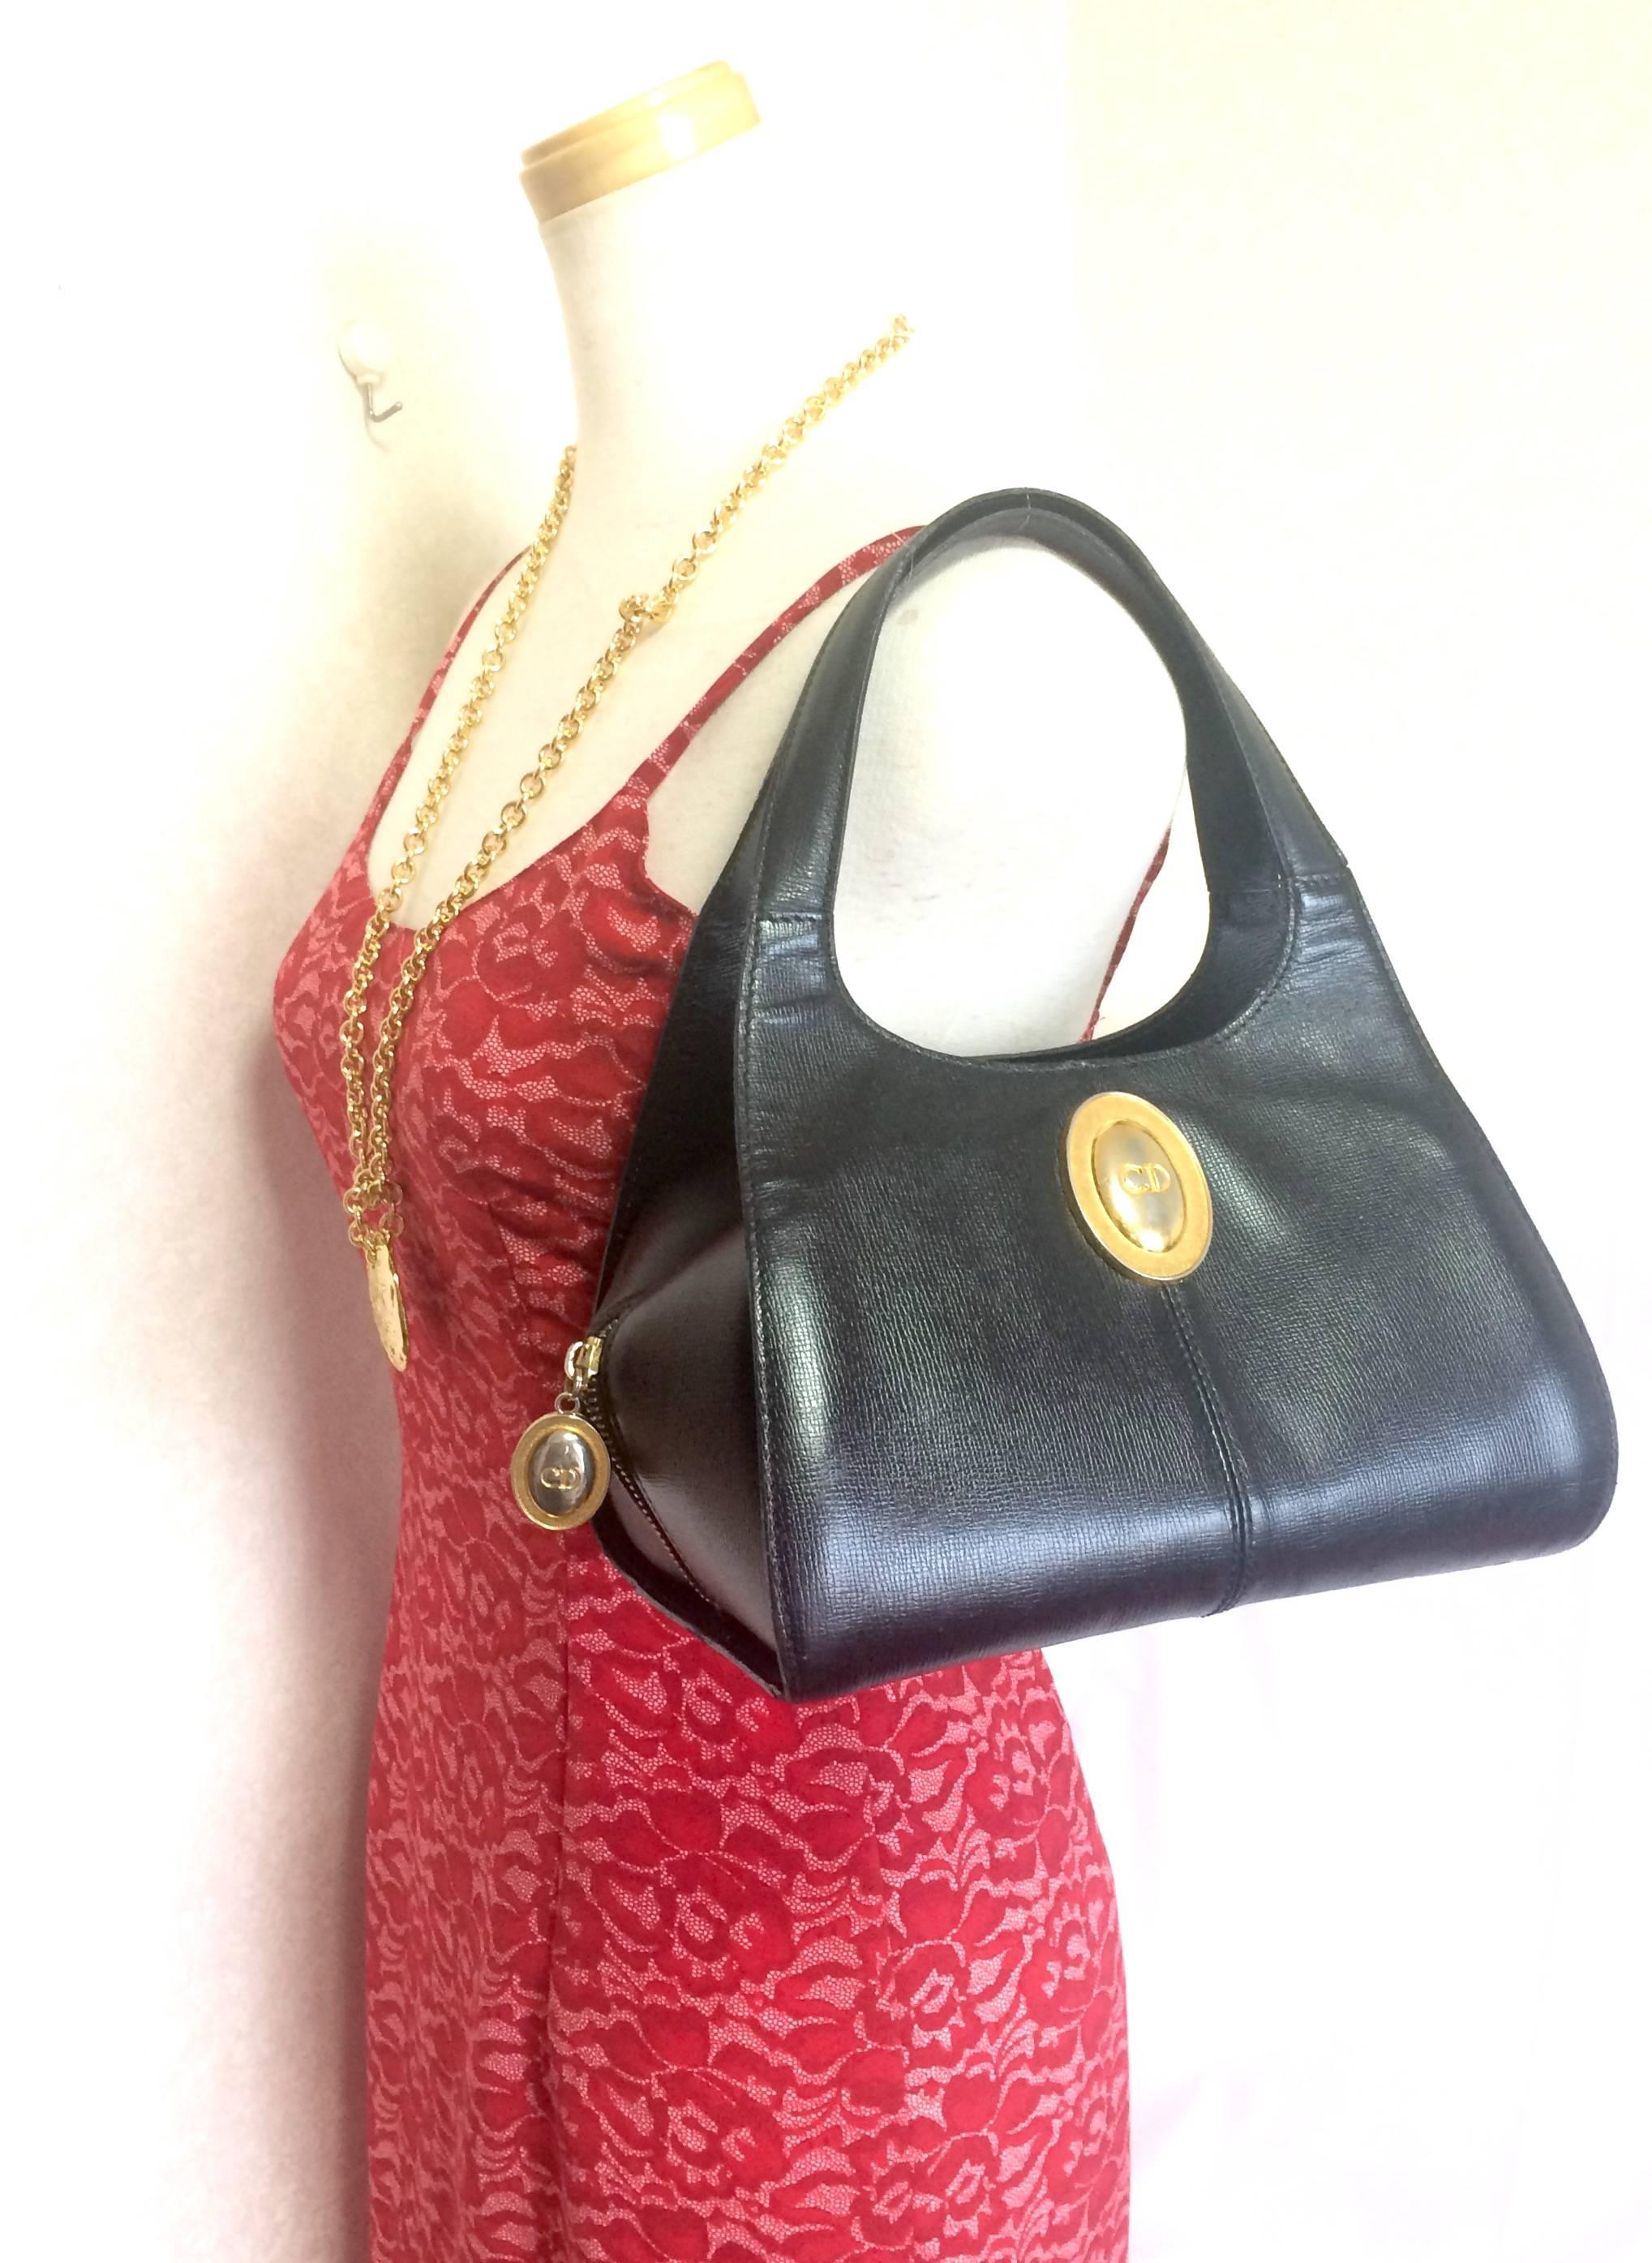 1990s. Vintage Christian Dior black grained leather handbag with golden oval shape CD logo motif. Classic style but rare design. Daily use.

Introducing another adorable vintage purse from Christian Dior back in the 90's.
If you are looking for a